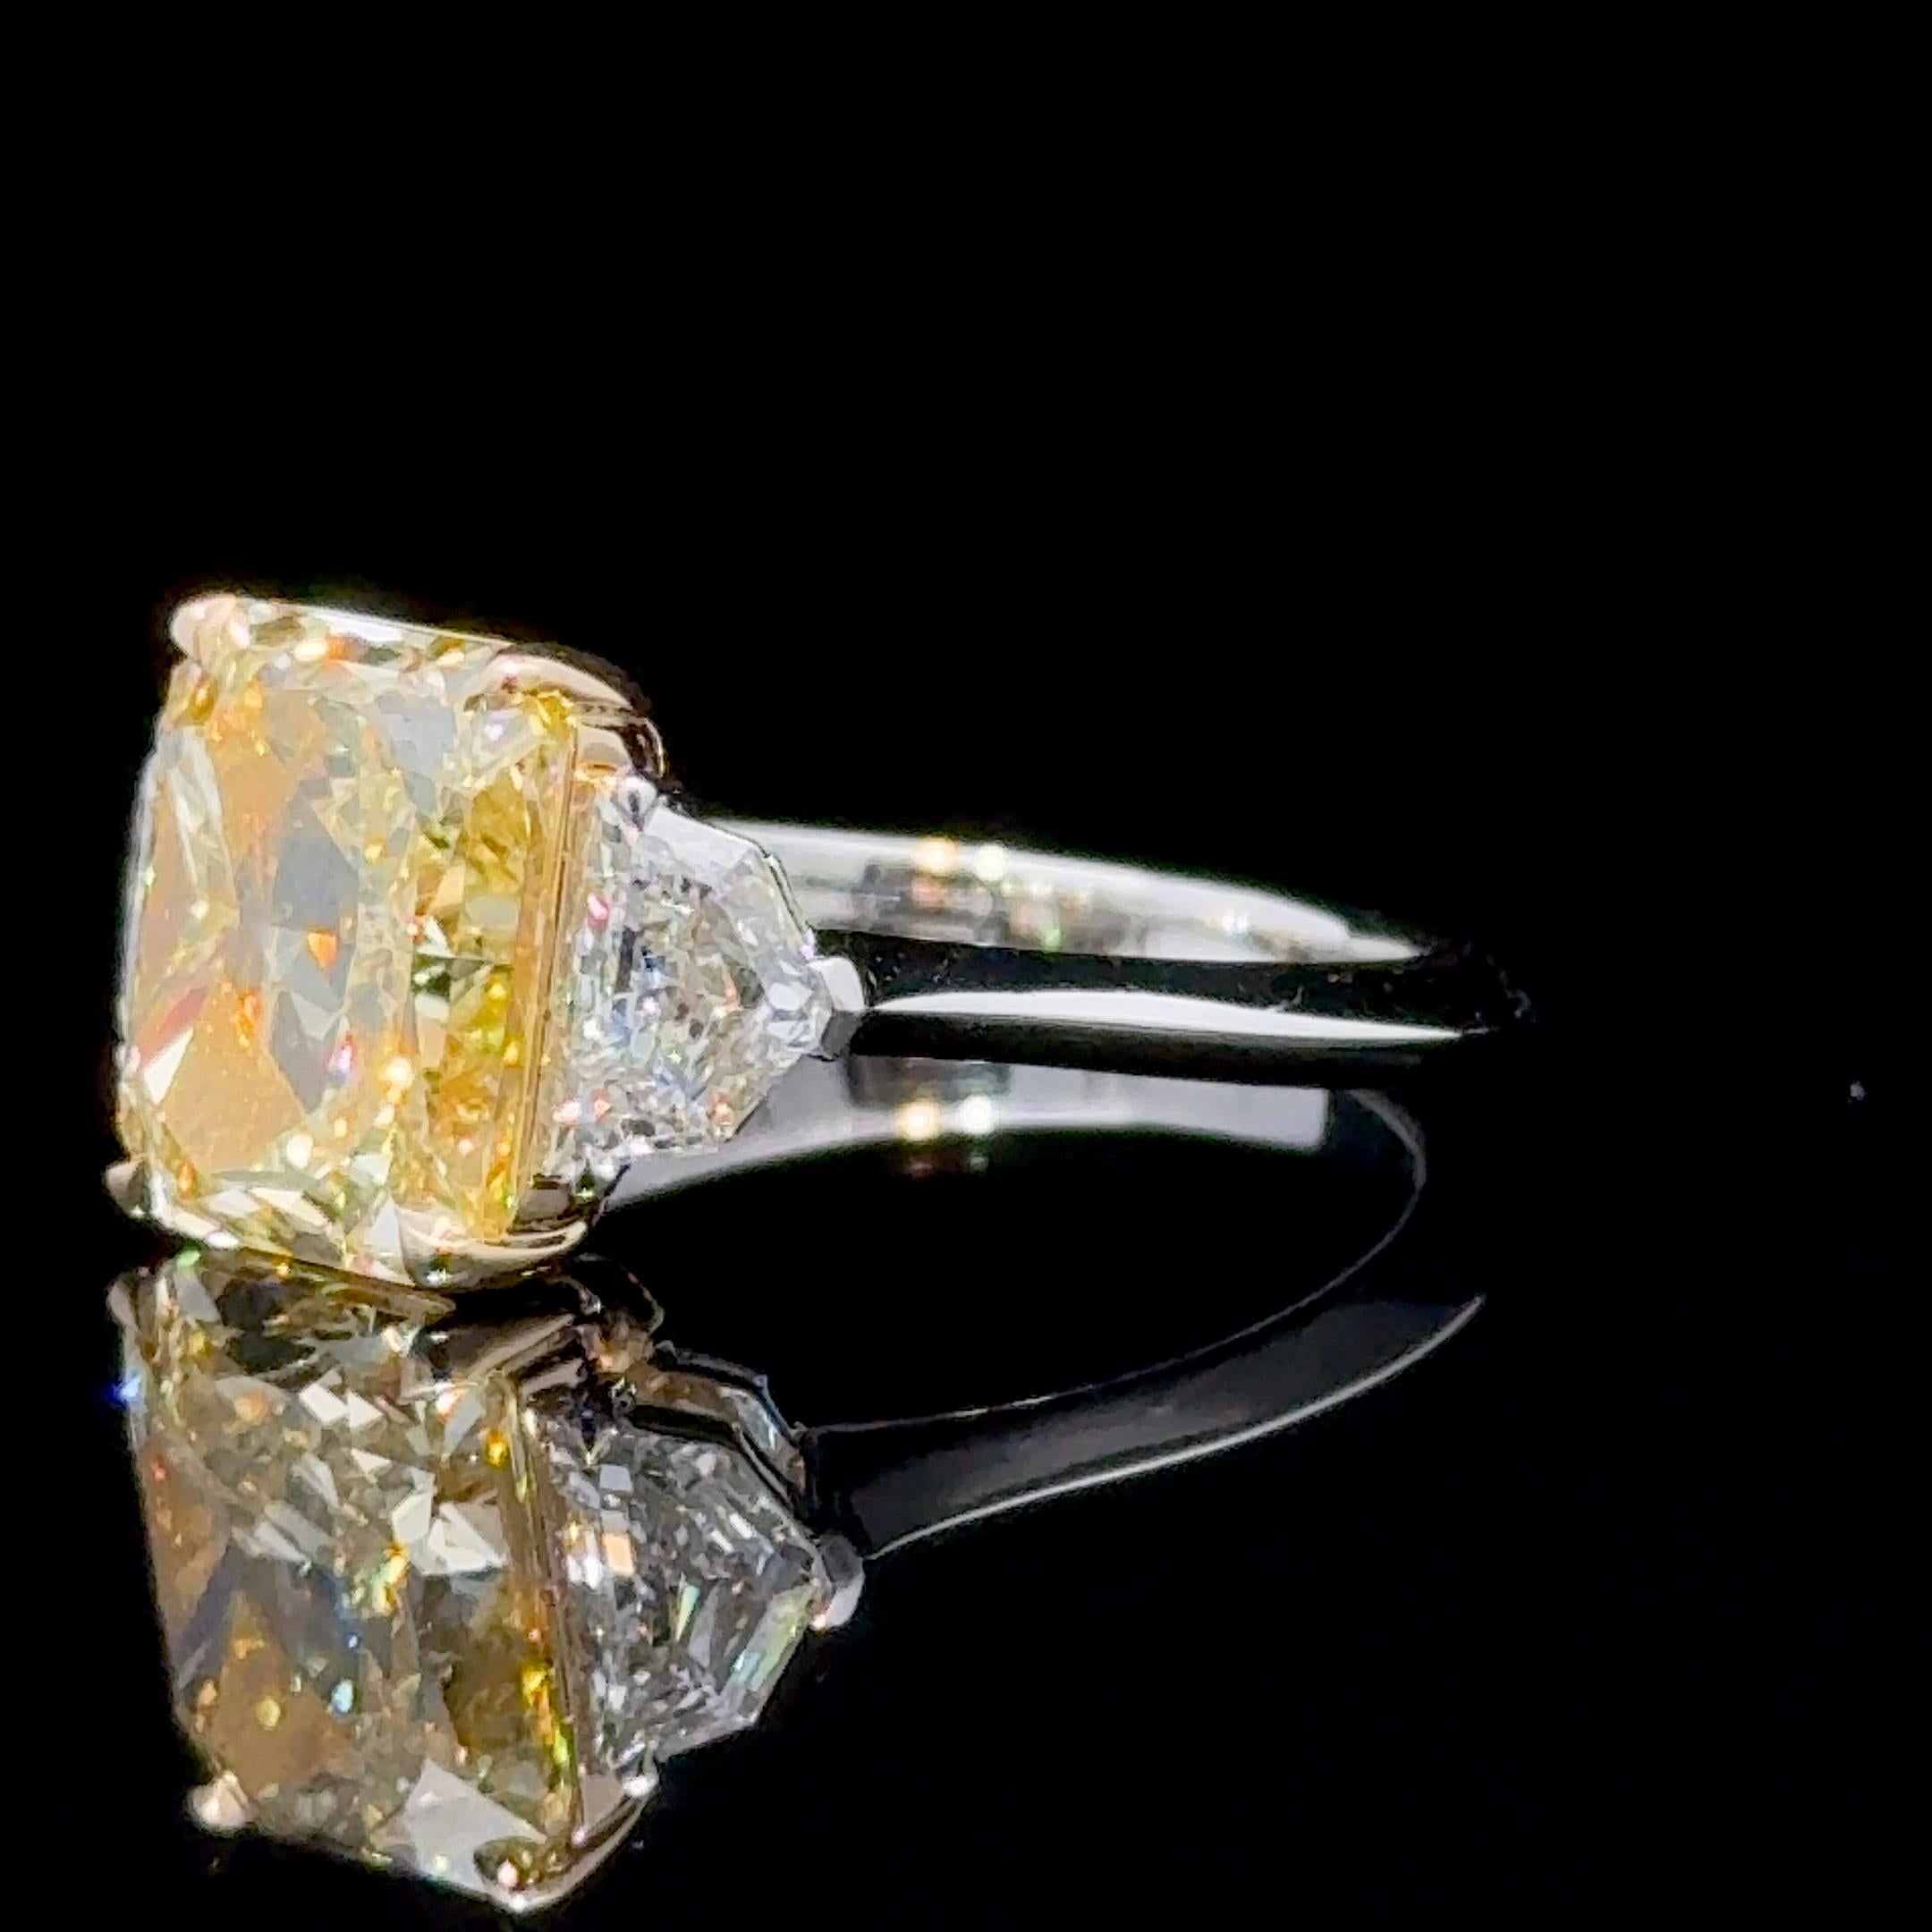 Radiant Cut GIA Certified 4.28 Carat Radiant Fancy Yellow Internally Flawless Diamond Ring For Sale